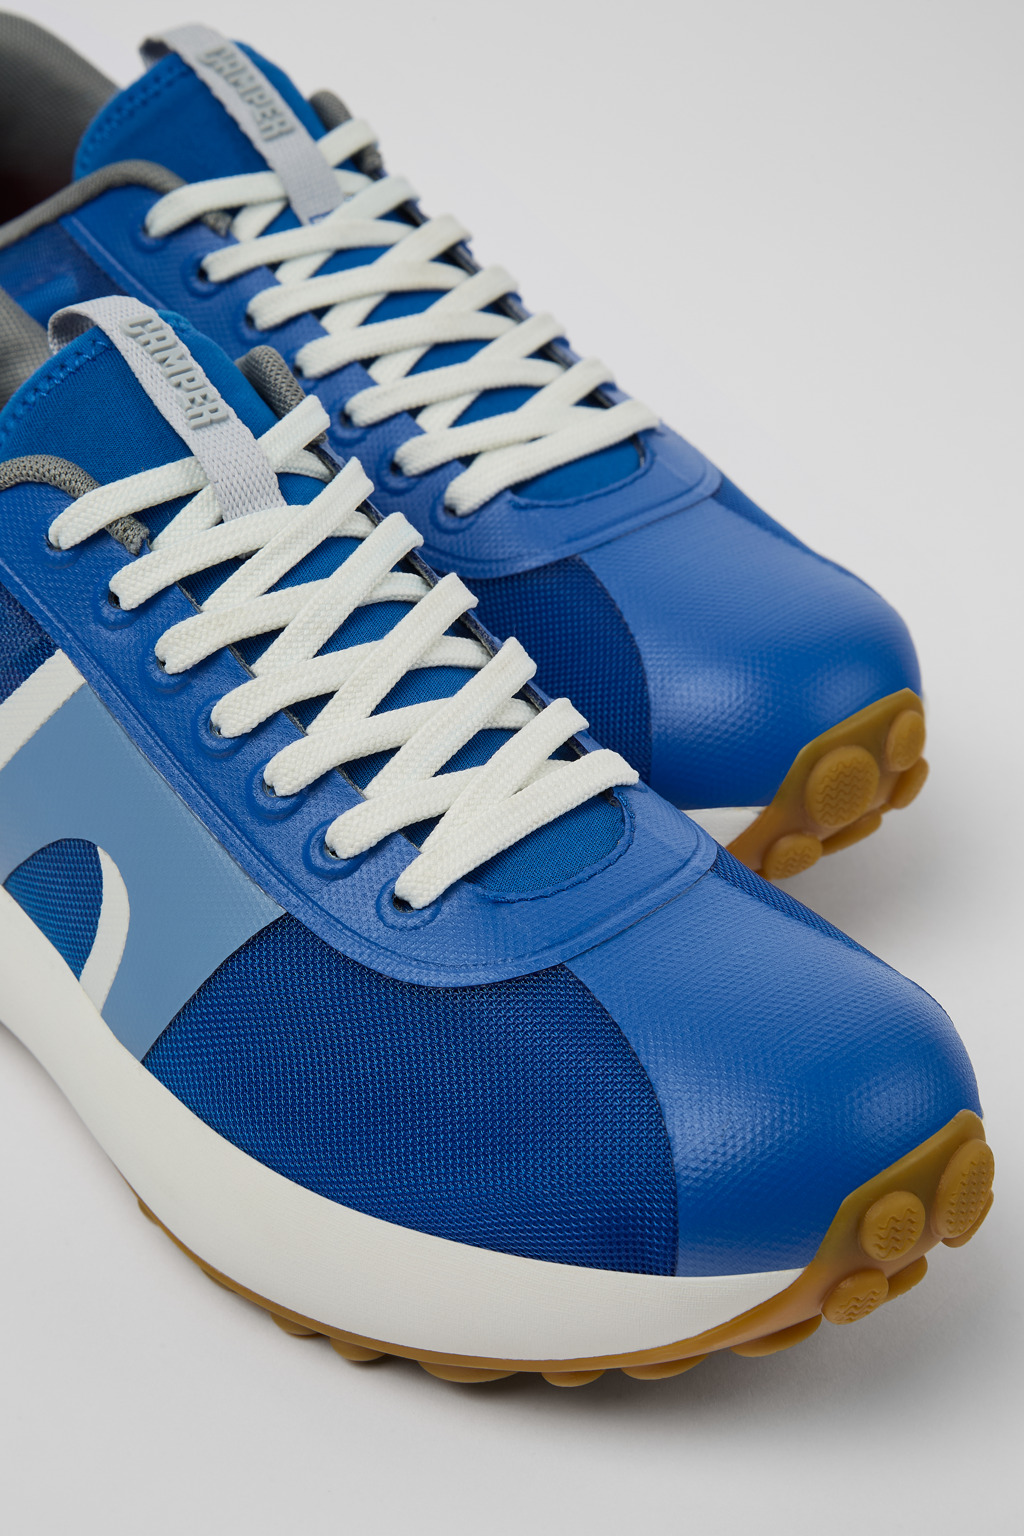 Pelotas Blue Sneakers for Men - Fall/Winter collection - Camper Canada